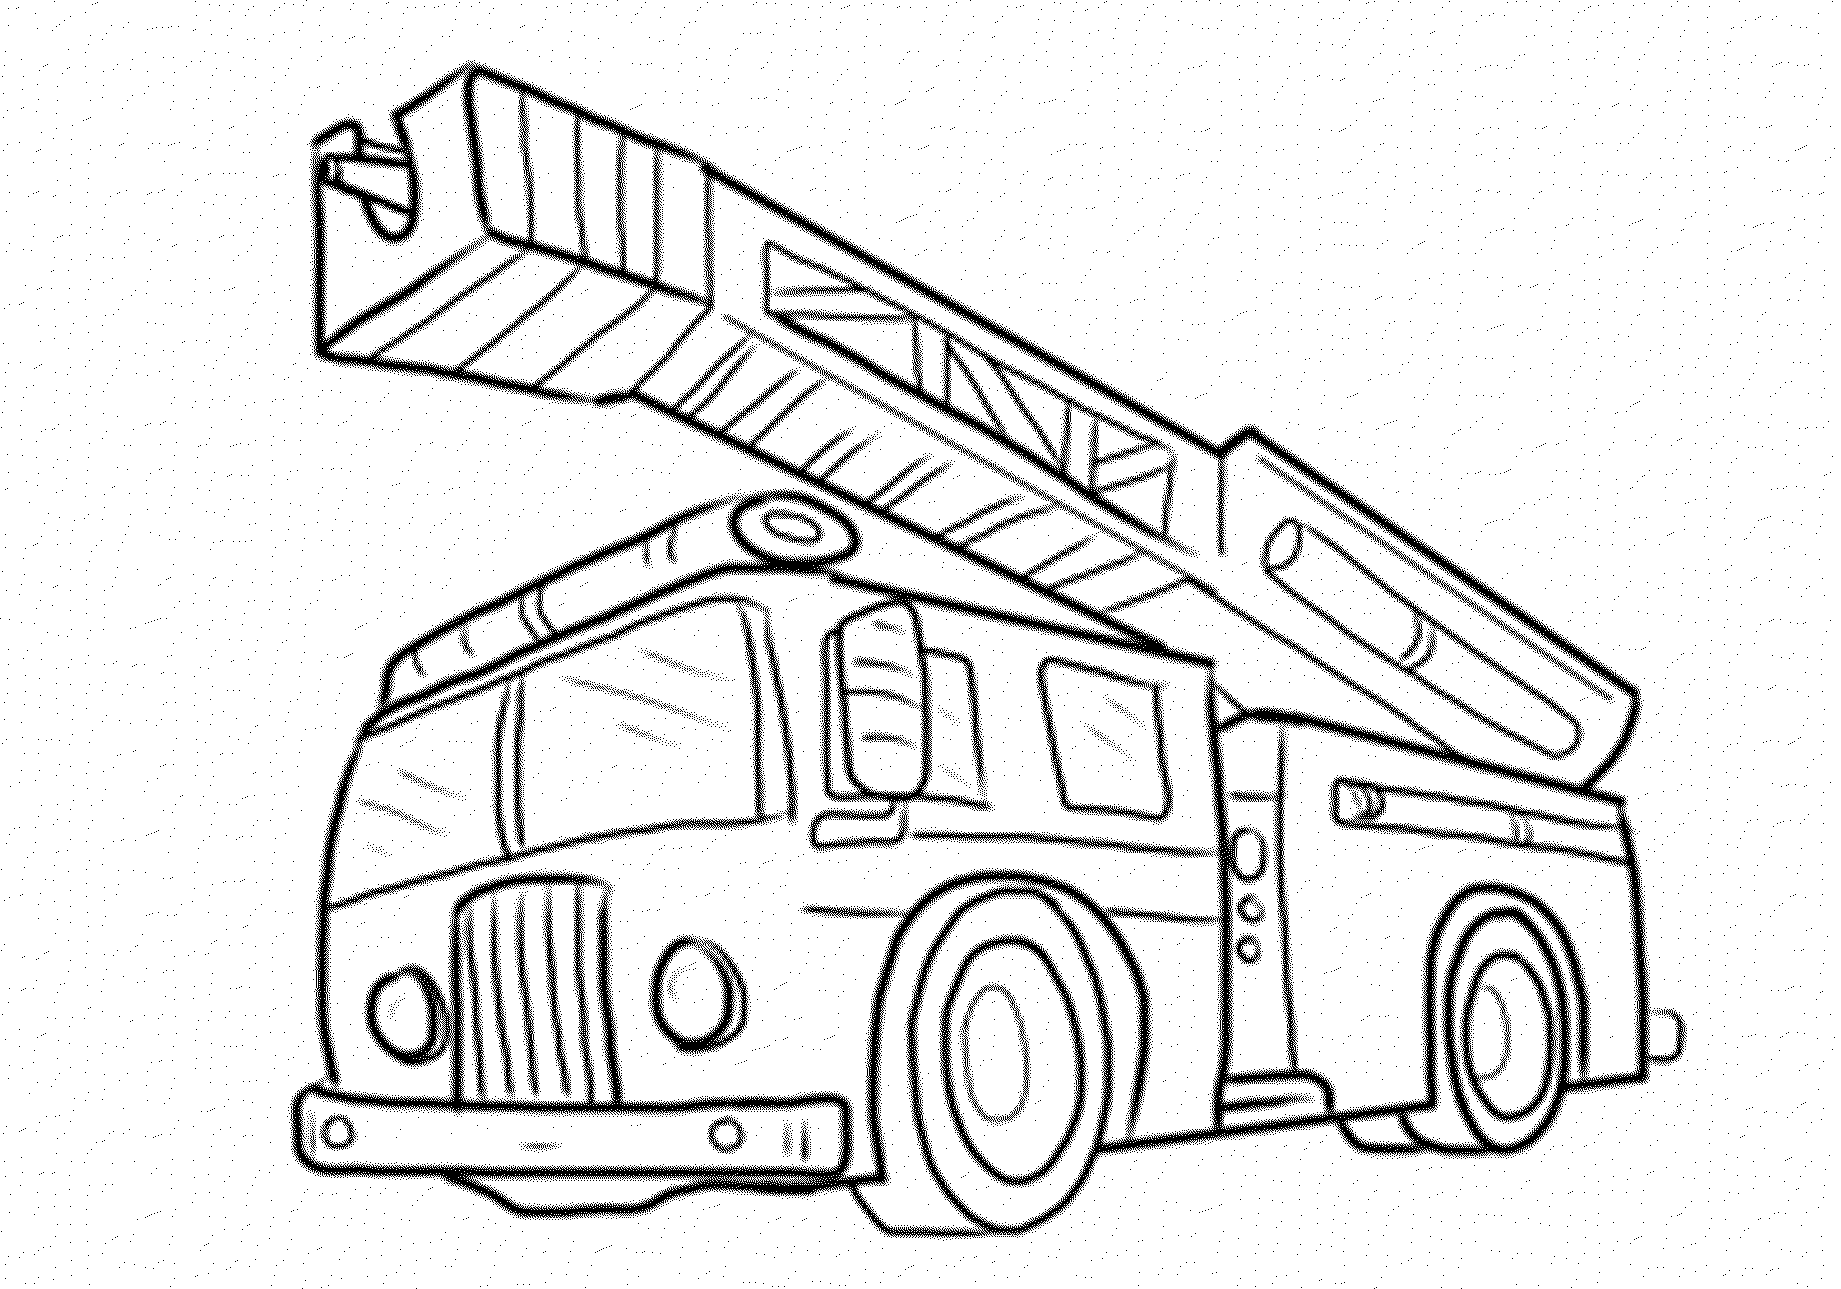 Fire Truck Coloring Pages Pdf at Free